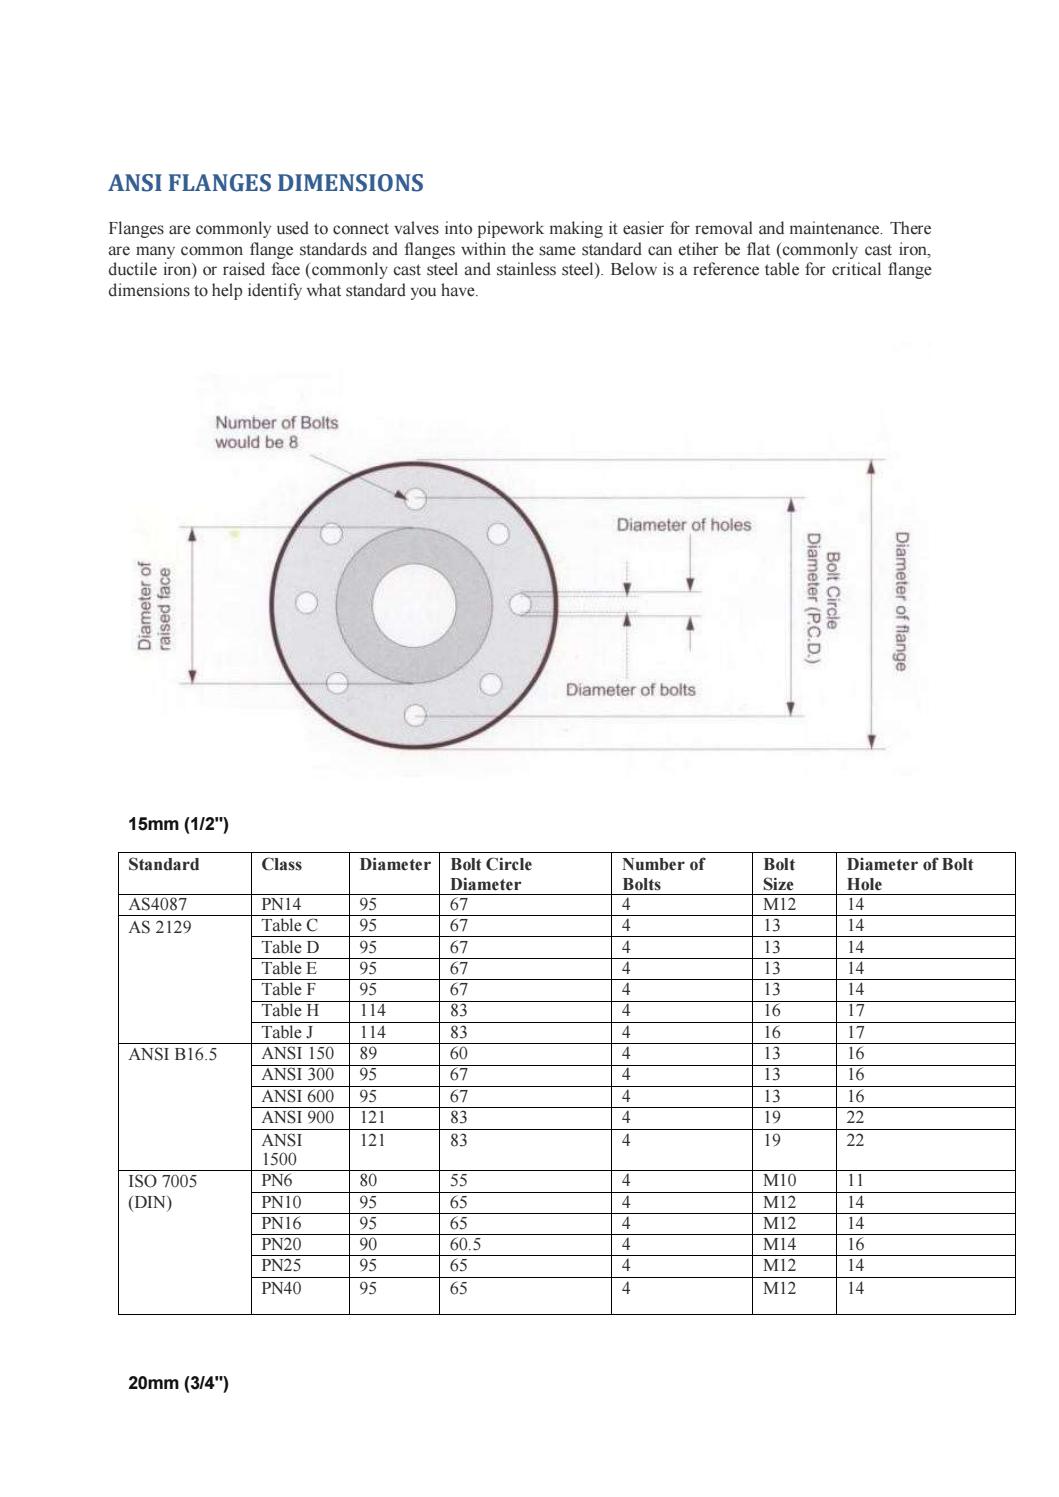 ANSI FLANGES DIMENSIONS

Flanges are commonly used to connect valves into pipework making it casier for removal and maintenance There
are many common flange standards and flanges within the same standard can etiher be flat (commonly cast iron,
ductile won) or raised face (commonly cast steel and stainless steel) Below is a reference table for ential flange
dimensions to help sdentify what standard you have

Number of Bolts

would be 8

Diameter of
raised face

15mm (1127)
Standard

' AS4087
AS 2129

"ANSI BIG S

"180 7005
(DIN)

20mm (3/47)

 

Class

PNA
Table C

Table DD

"Table k

Table F

"Table H
"Table J
TANSLISO
"ANSI 300
ANSI 600
"ANSI 900
"ANSI

1500

"PNG
"PNIO
"PNI6
PN20
PN2S
"N40

Ti
121

"80

95

"9s
‘90
"os
"os

" Diameter Bolt Circle
_ Diameter

67

‘67
"67
Ki
‘67
C83
Ril

60

67
Ki
"83
Ts

ss
"6s
6s
T60s
"6s
K3

bobs sbbbbsaa

" Number of
. Bolts

aban

"Bolt

Size

TM12

(00d) smeweiq
opnD) wog

ebuey jo JmewenQ

" Diameter of Bolt
. Hole

4

Tie

14
Tia
“4
“7